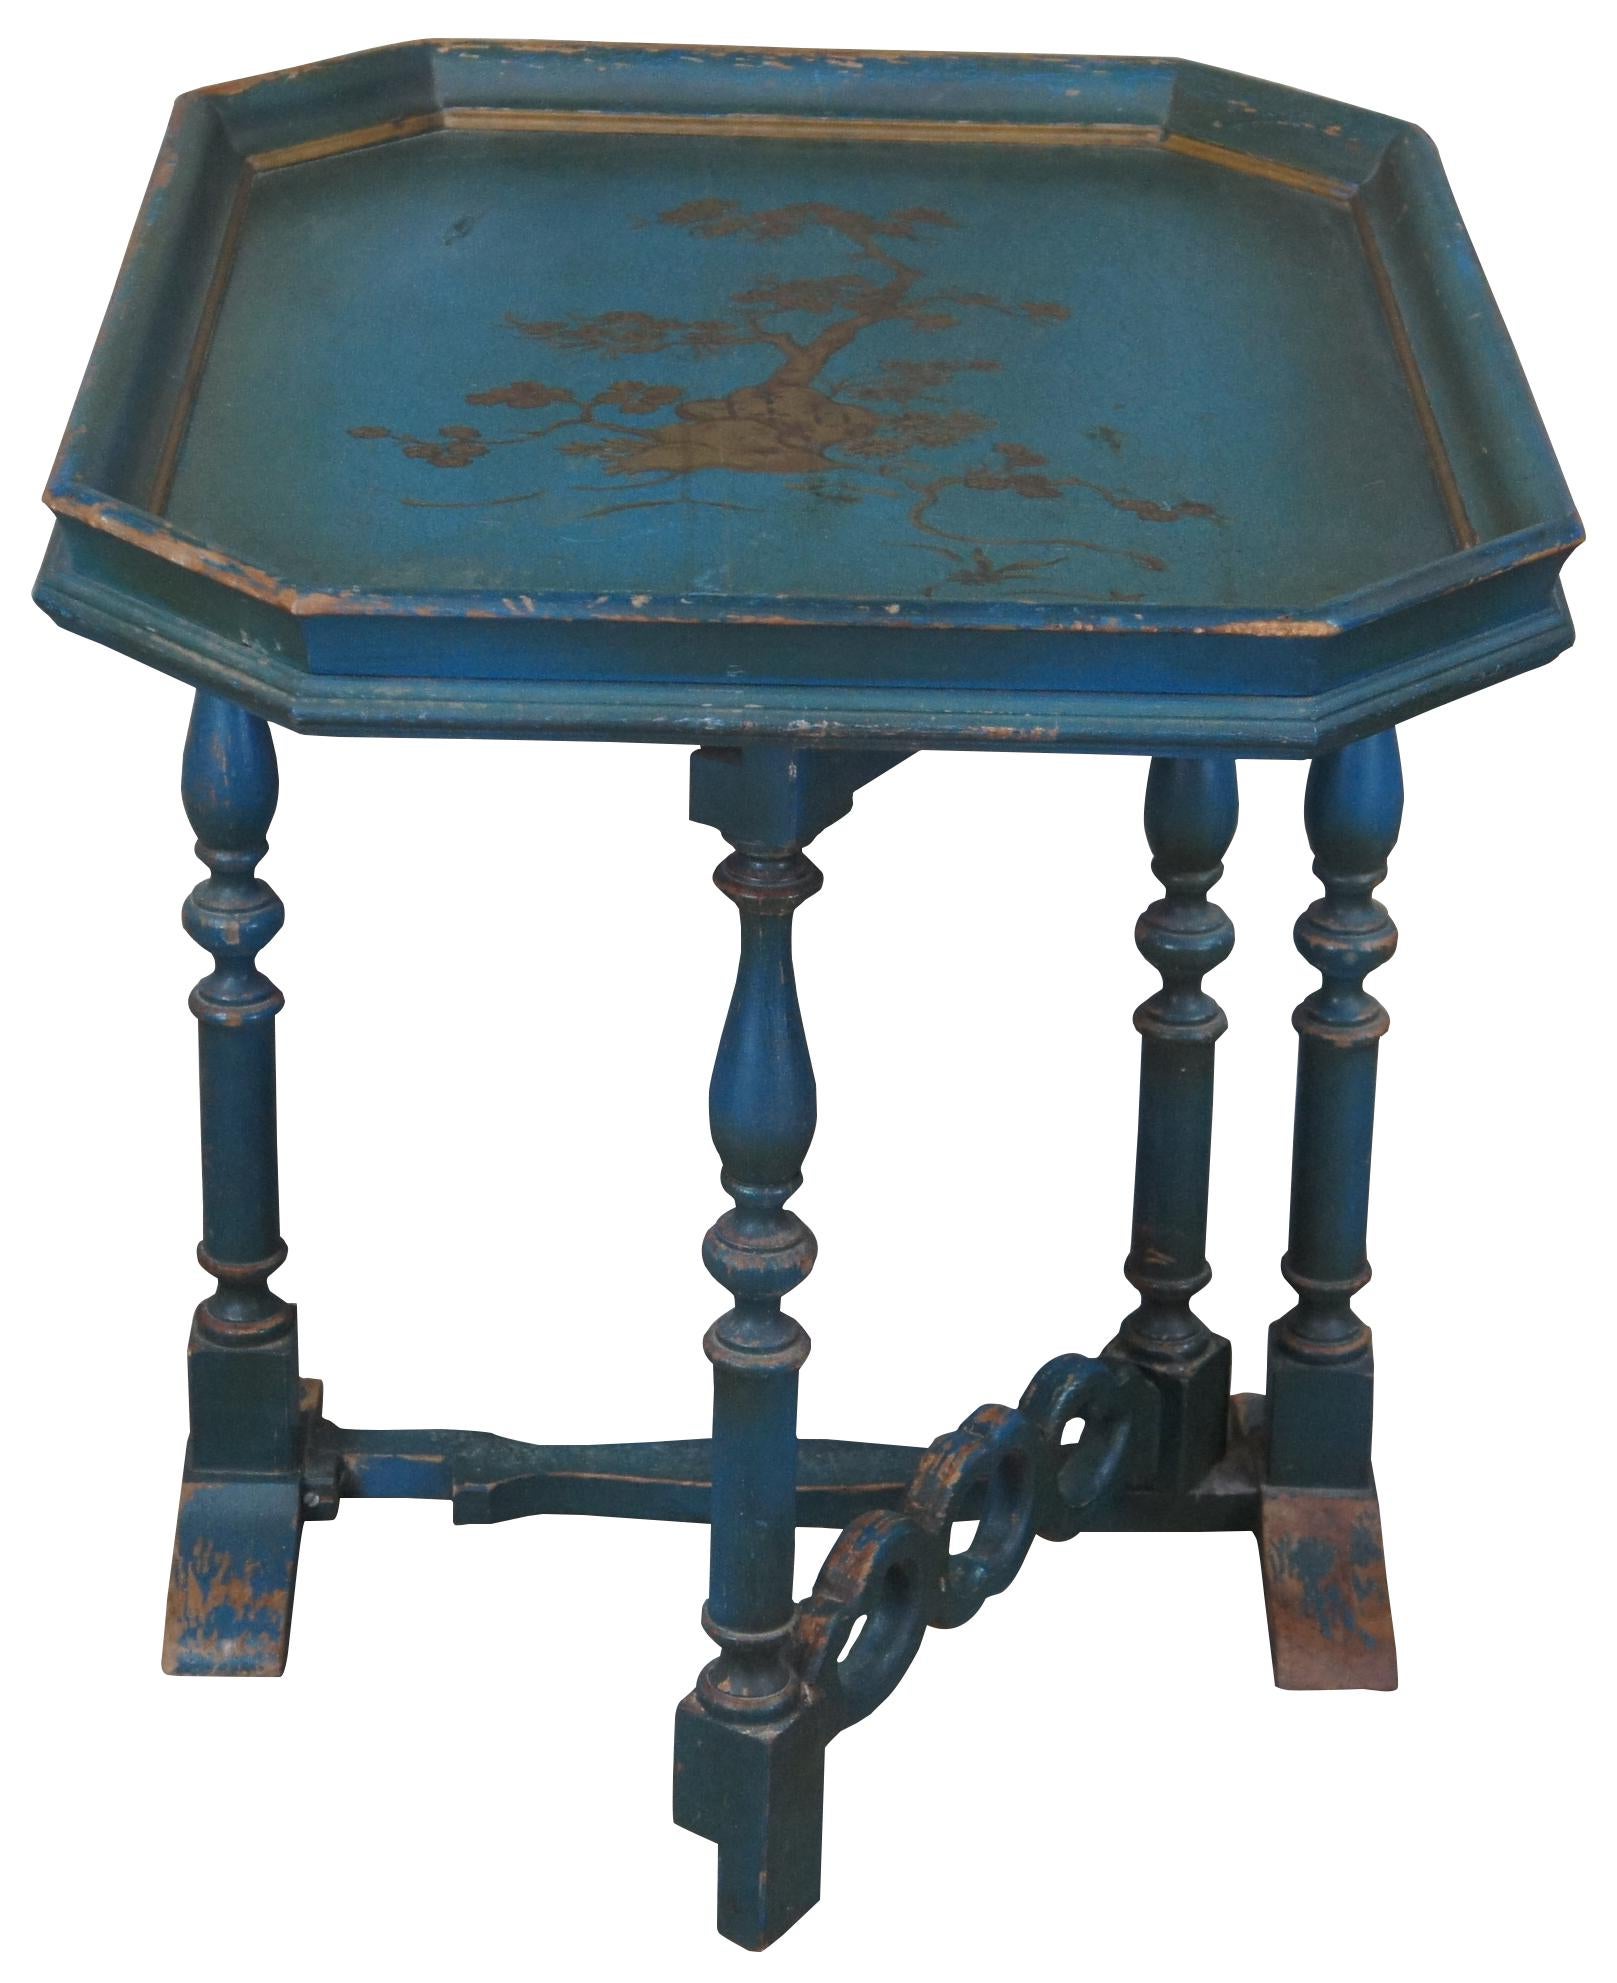 Early 20th century William & Mary style side/ tea table. Features a gateleg design with turned supports and octagonal tray with ogee edge. Finished in a bohemian blue with cherry blossom tree in gold. 

Measures: Closed - 20.5